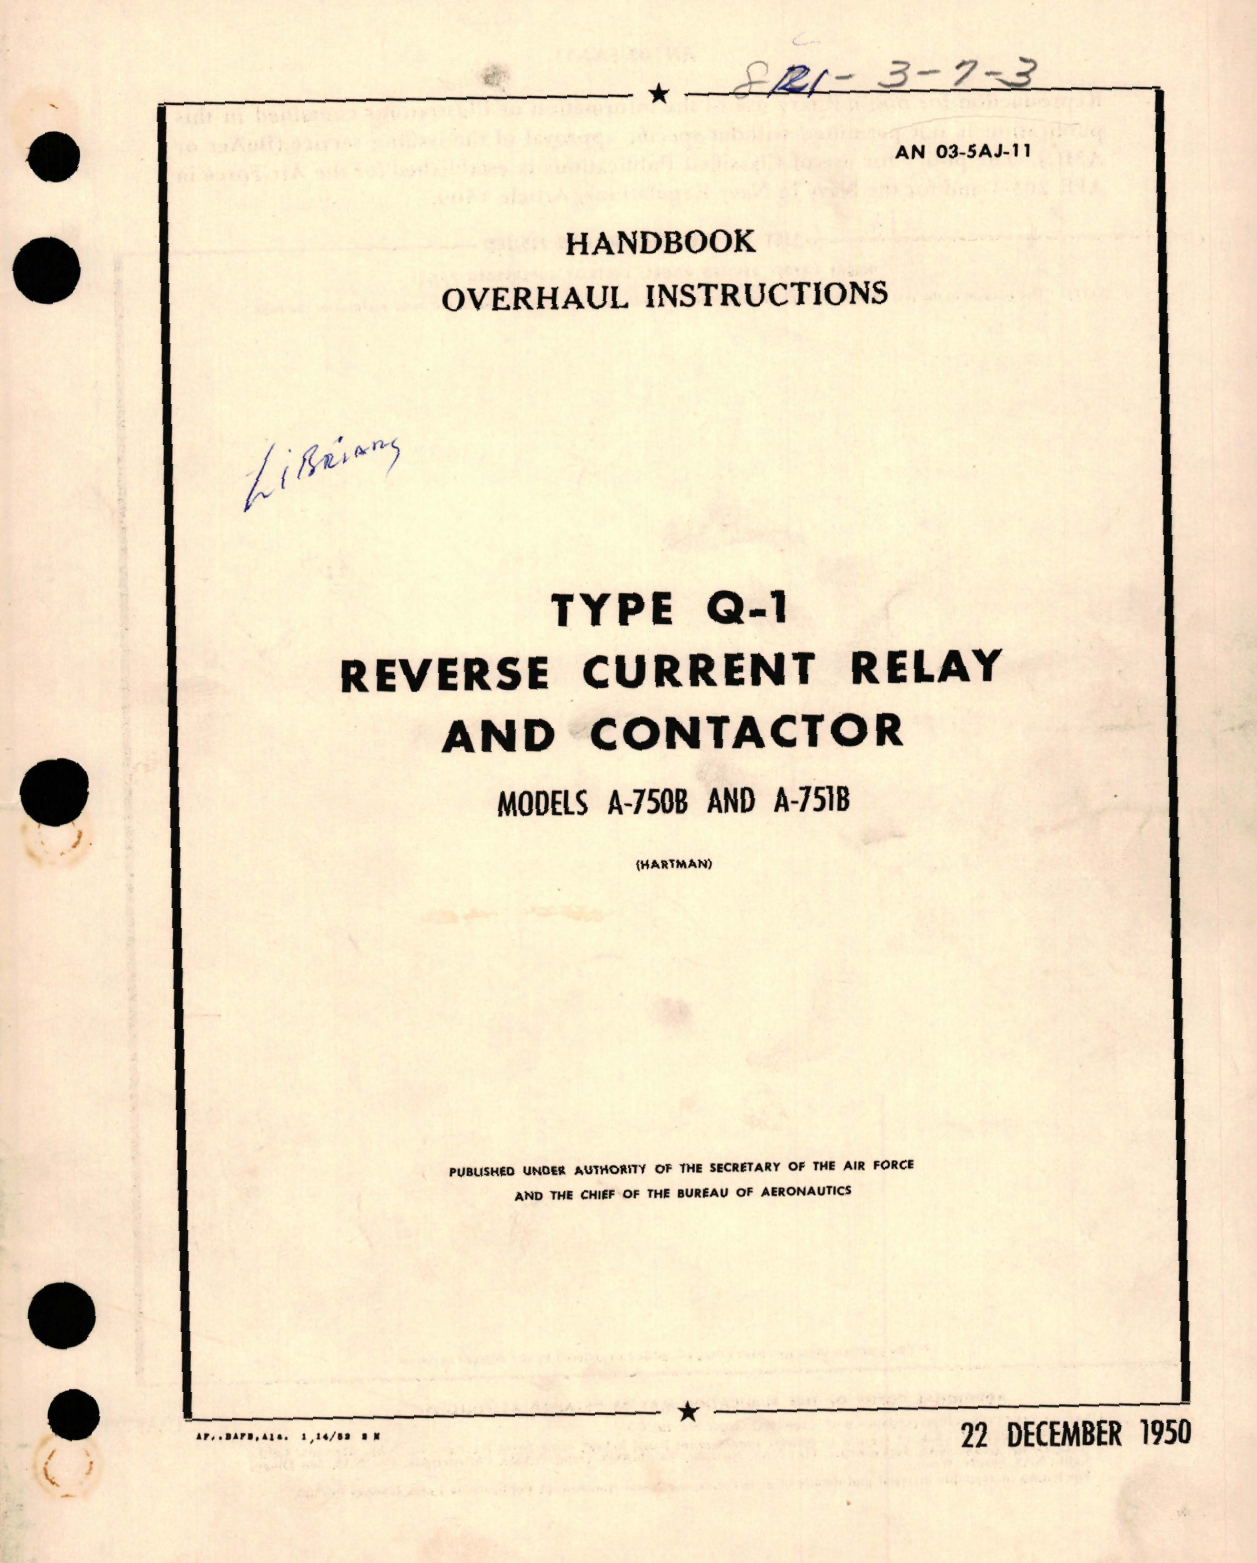 Sample page 1 from AirCorps Library document: Overhaul Instructions for Reverse Current Relay and Contactor - Type Q-1 - Models A750B, A-751B